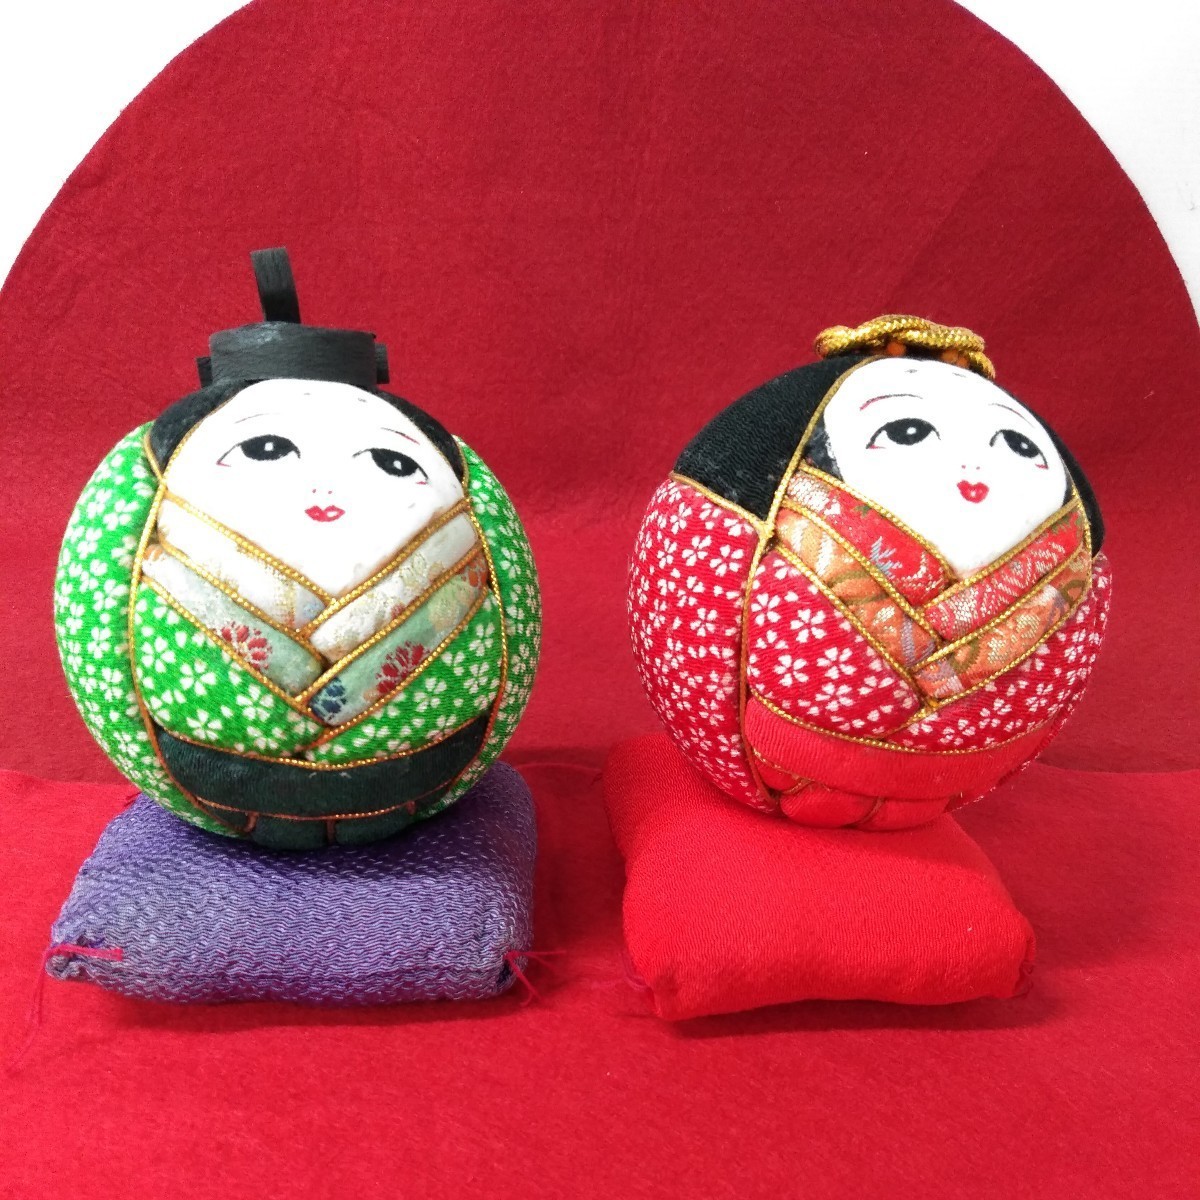 g_t R022 [Handmade] Temari Hina Doll It looks like it has been stored for a long time. How about using it as interior decoration for Hinamatsuri, season, Annual Events, Doll's Festival, Hina Dolls